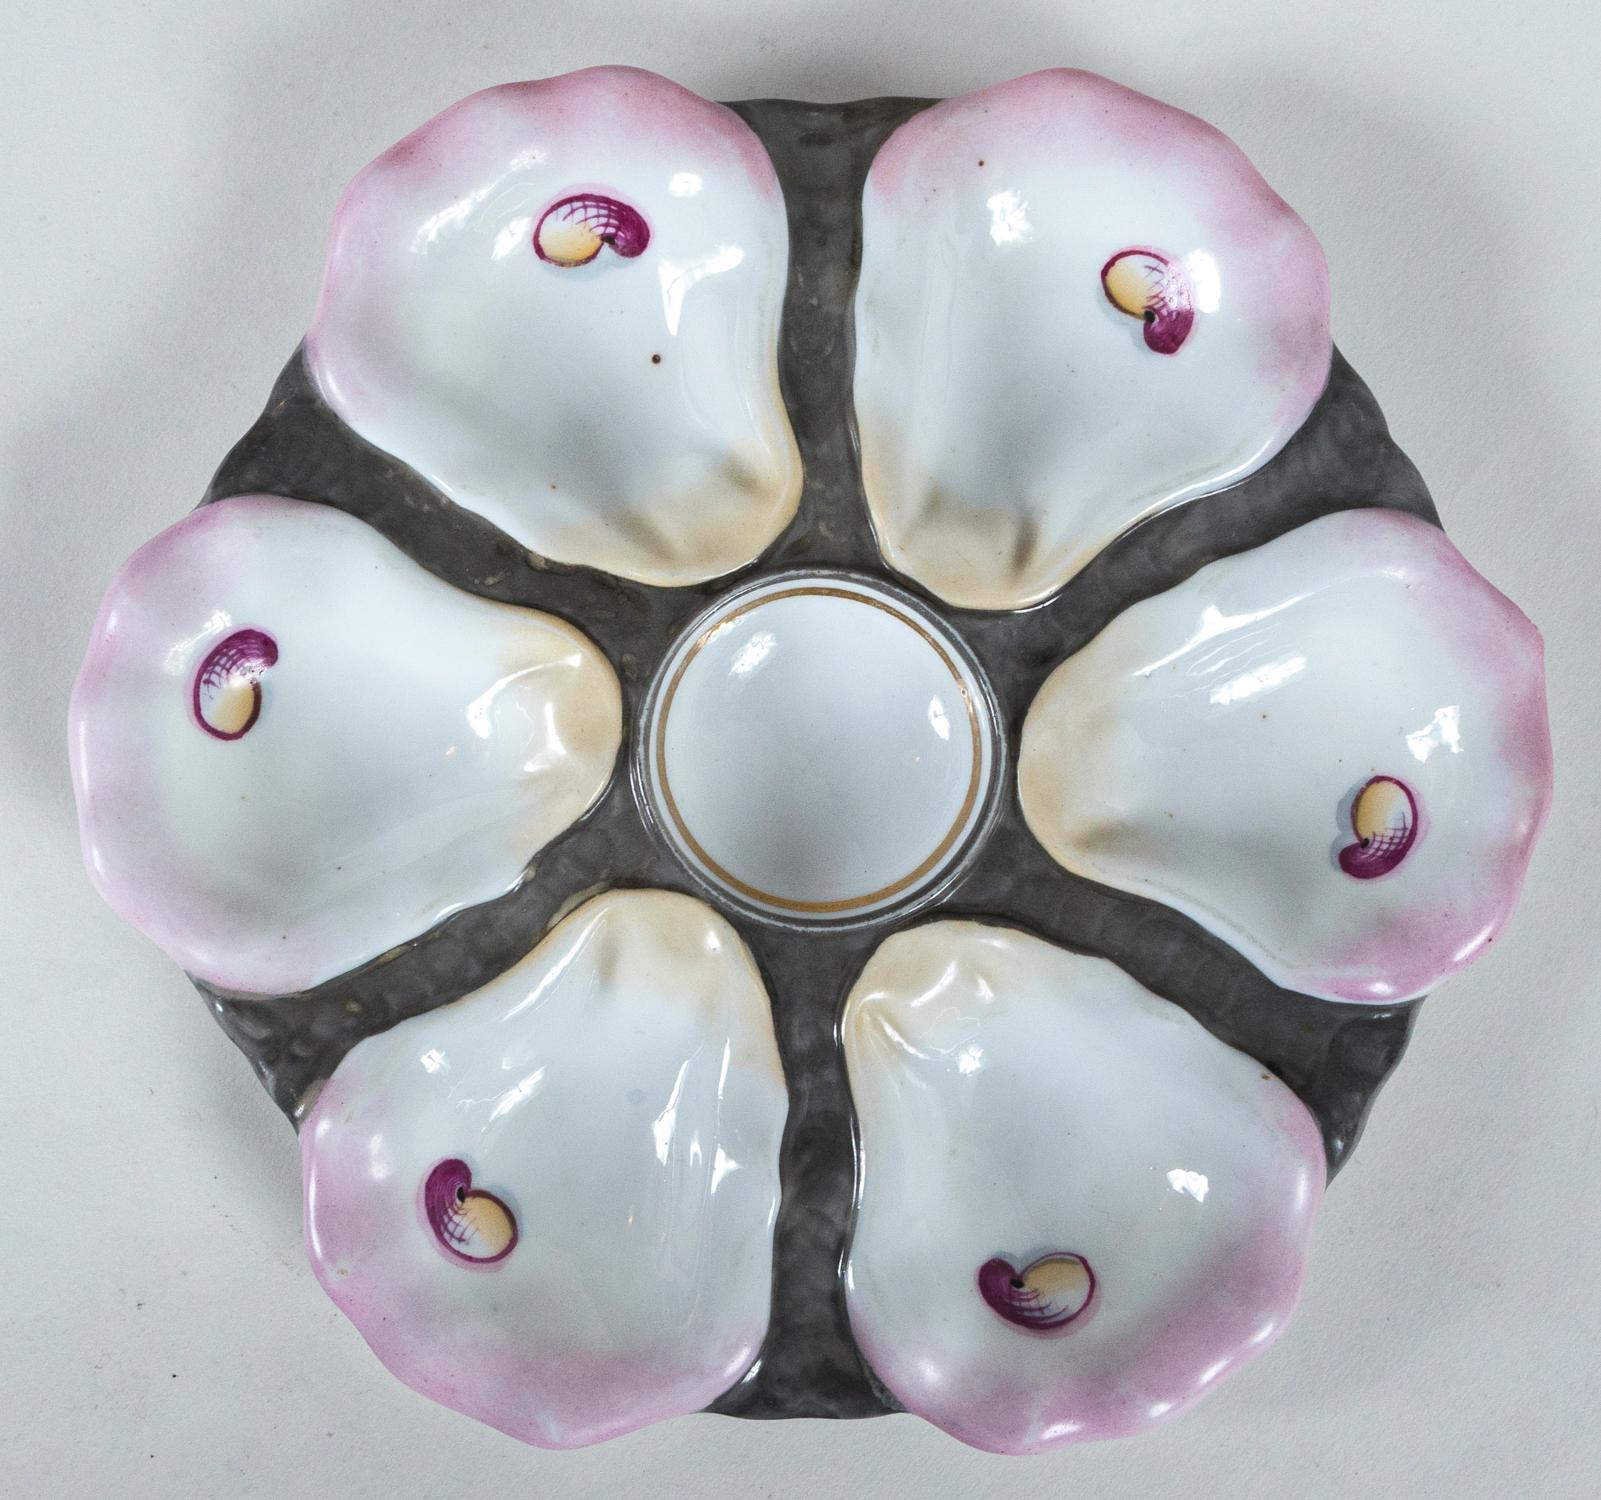 Hand-painted French Oyster plate, circa 1900. Six well plate. Pale pink accents with gray background. Marks on back: incised '143', signed '76'.